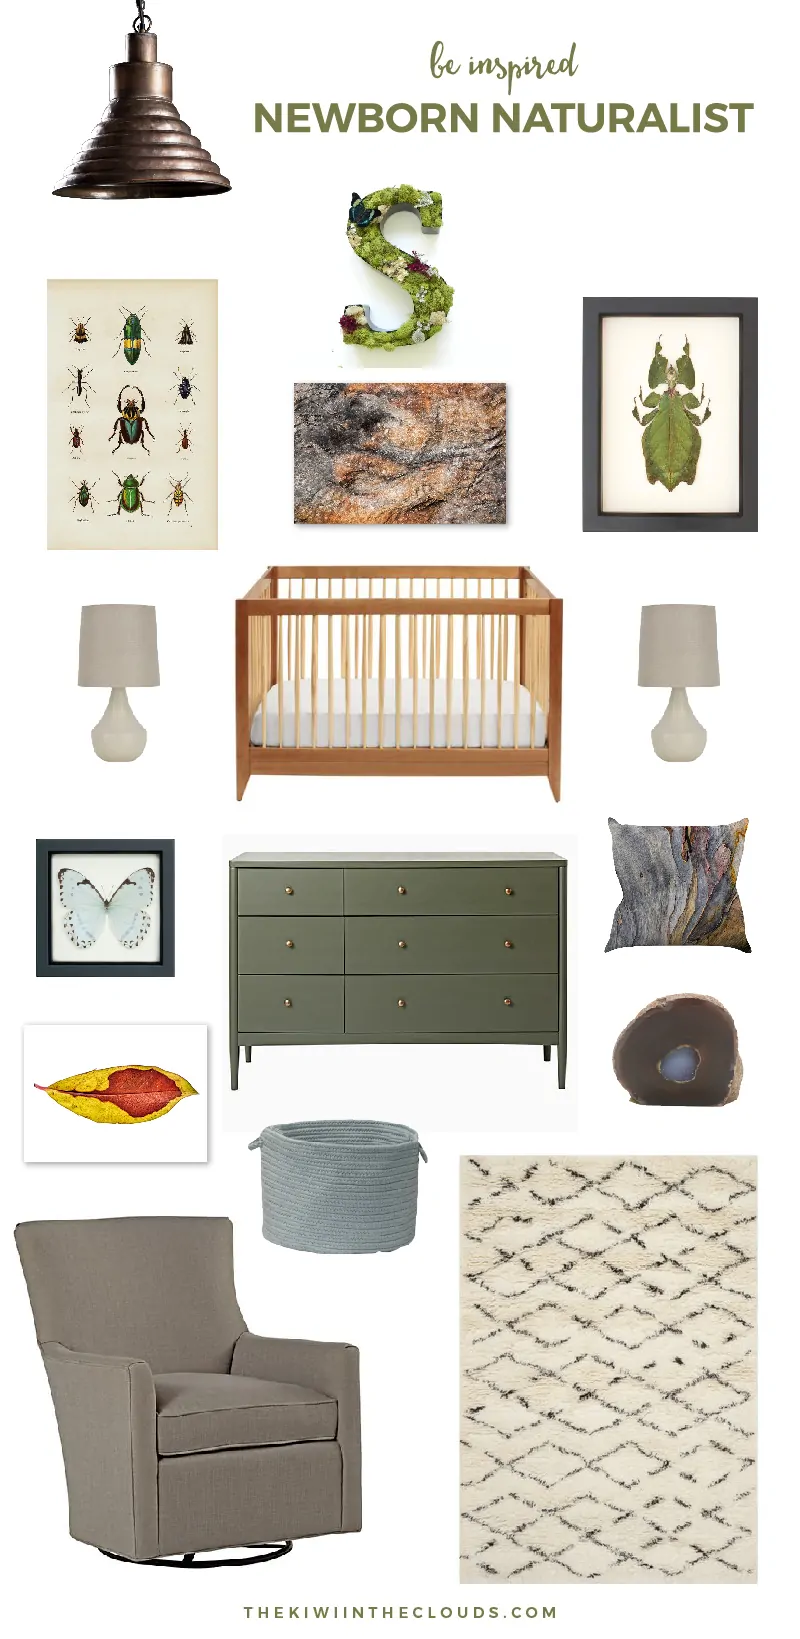 Newborn Naturalist | This nursery theme features all the natural curiosities on the Earth and pulls it all together in a calming, neutral and soothing baby room. Click through to find all the details.